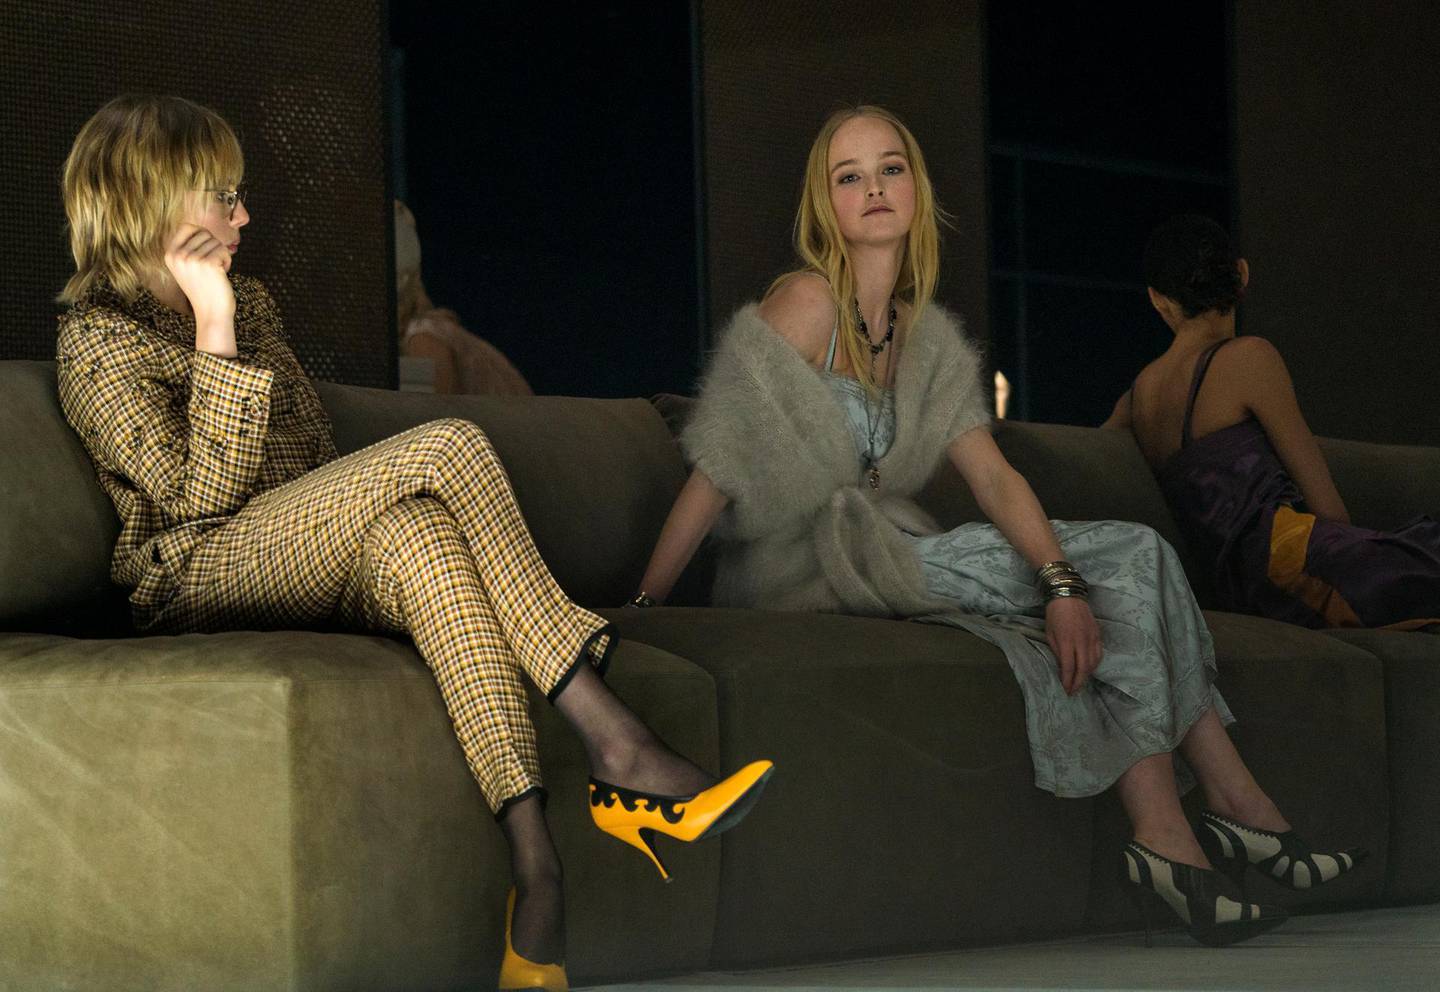 Models, wearing fashion from the Bottega Veneta collection, sit on furniture that is part of the runway show during Fashion Week in New York, Friday, Feb. 9, 2018. (AP Photo/Craig Ruttle)